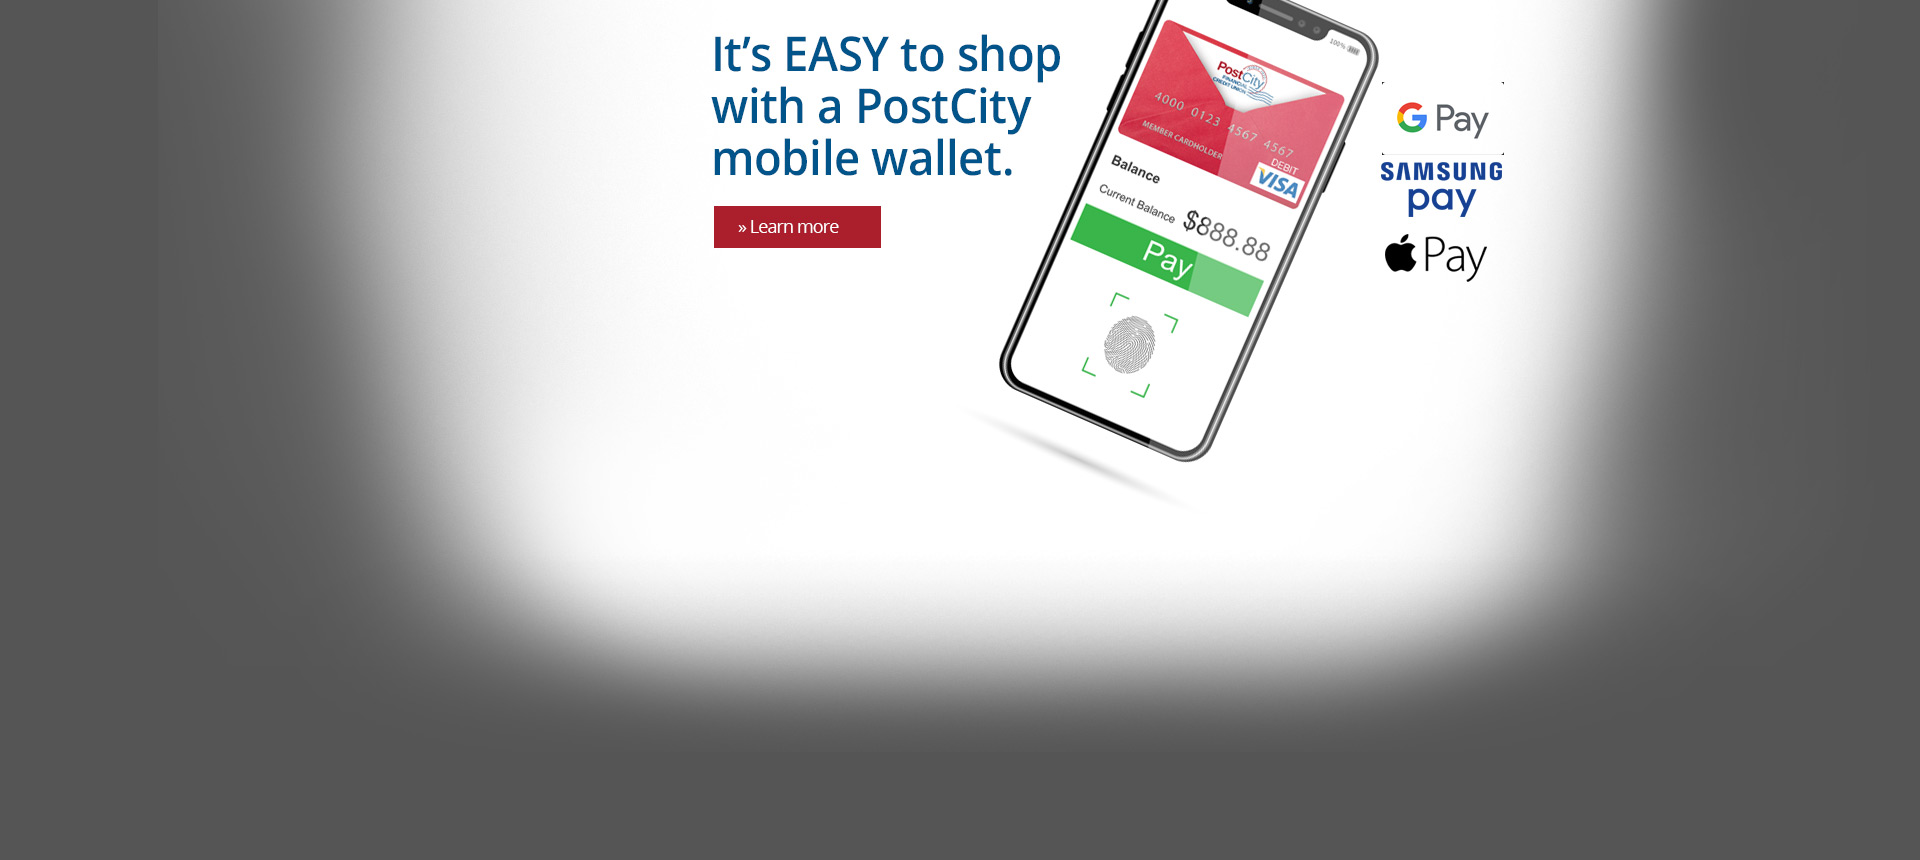 Pay the Easy Way with Mobile Wallets